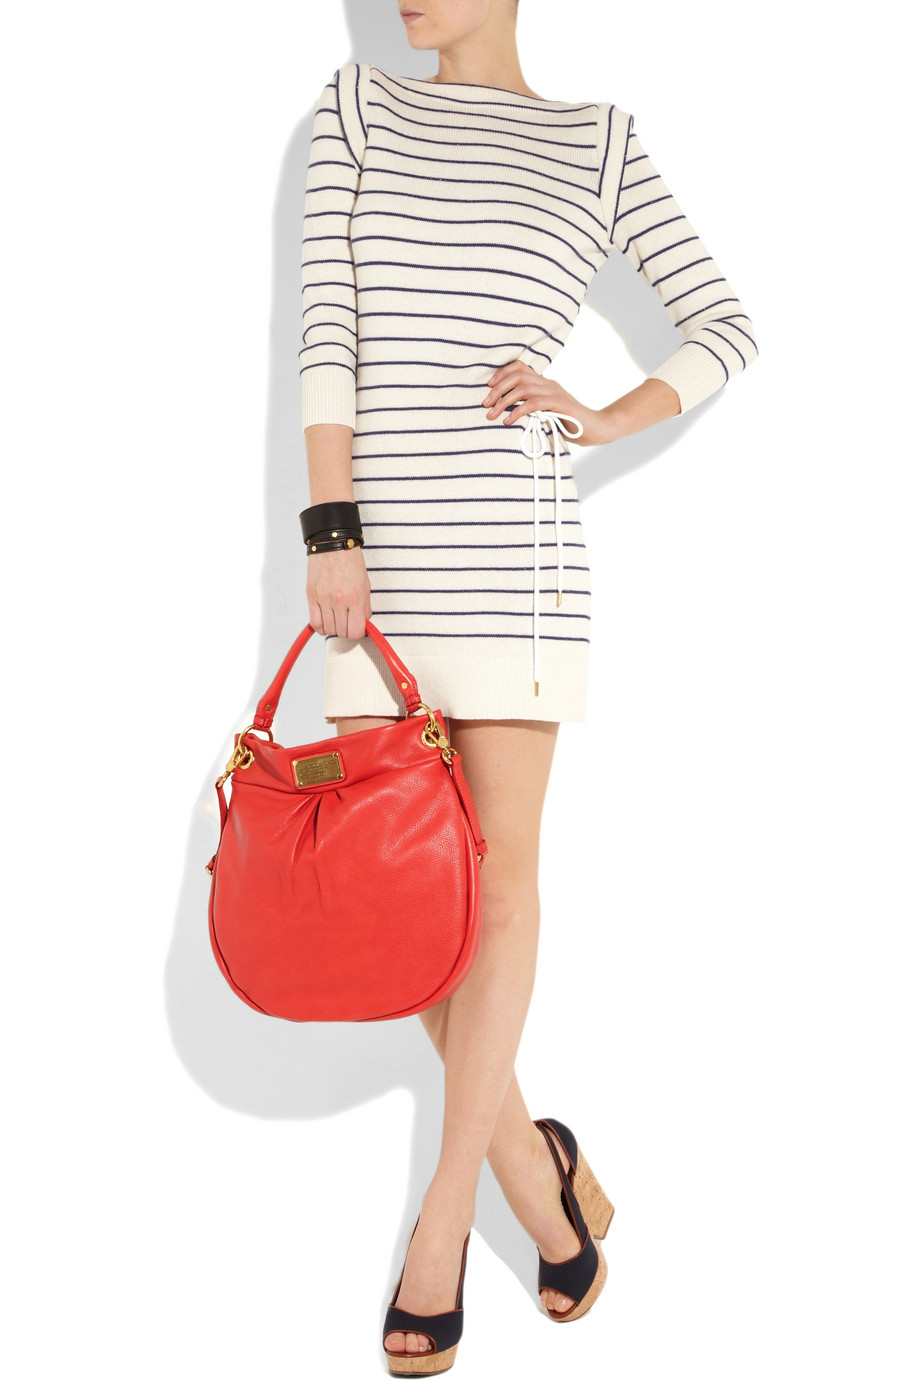 Marc By Marc Jacobs Hillier Hobo Leather Shoulder Bag in Coral (Red) - Lyst